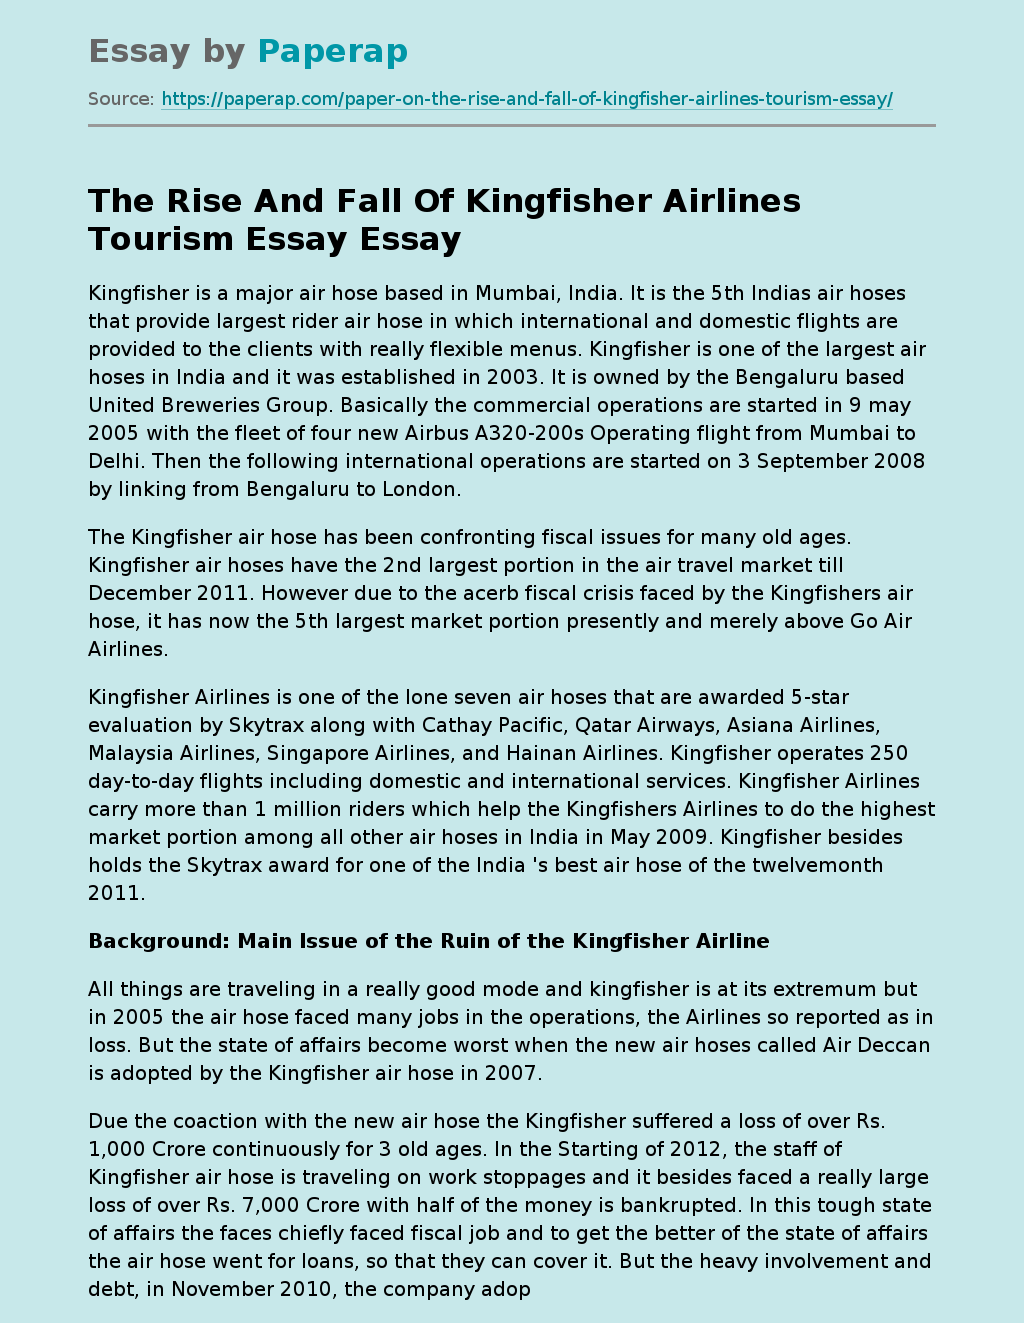 The Rise And Fall Of Kingfisher Airlines Tourism Essay